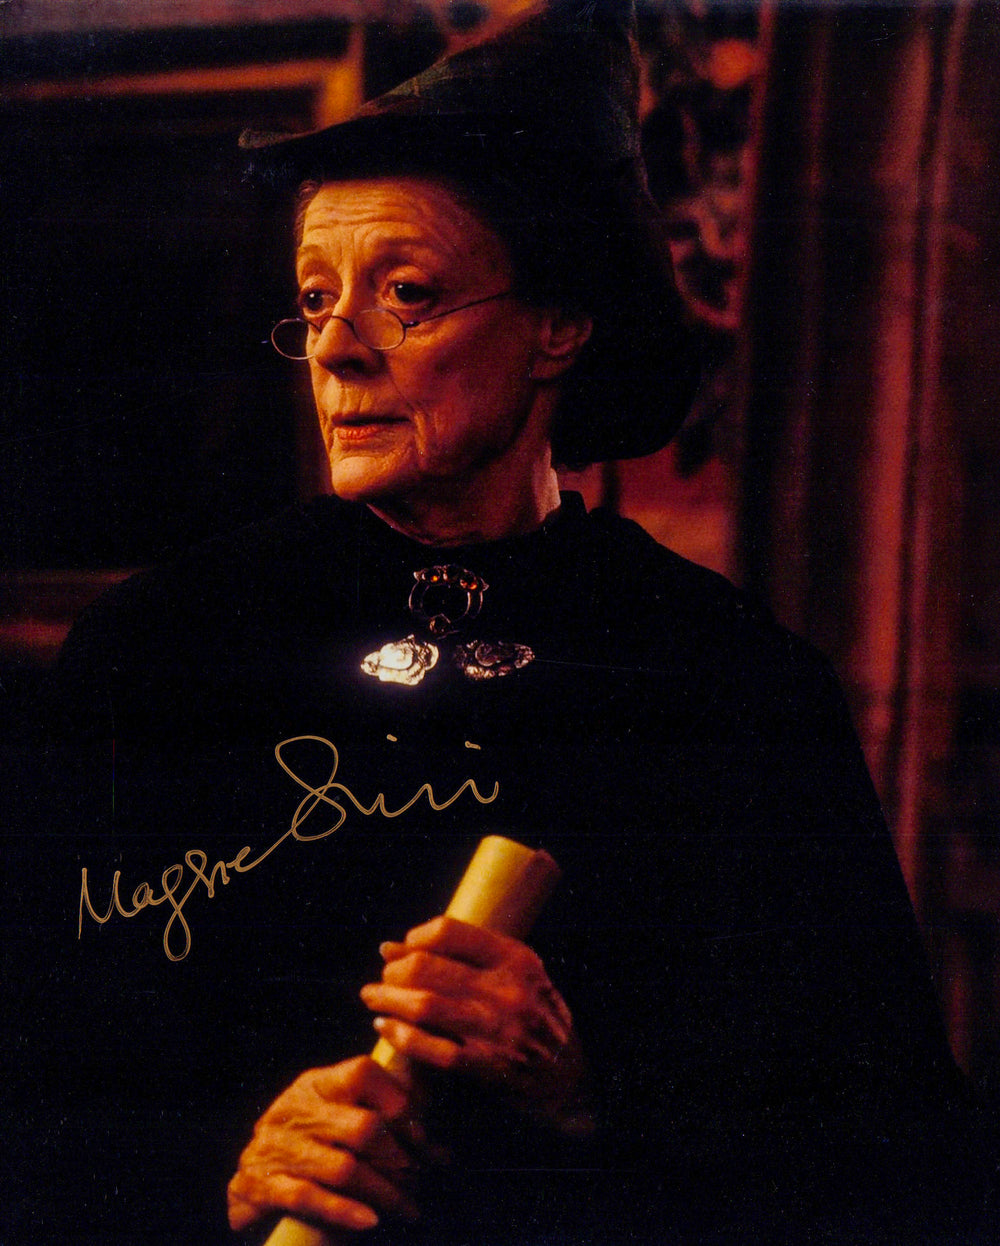 Maggie Smith as Professor McGonagall from Harry Potter Signed 8x10 Photo